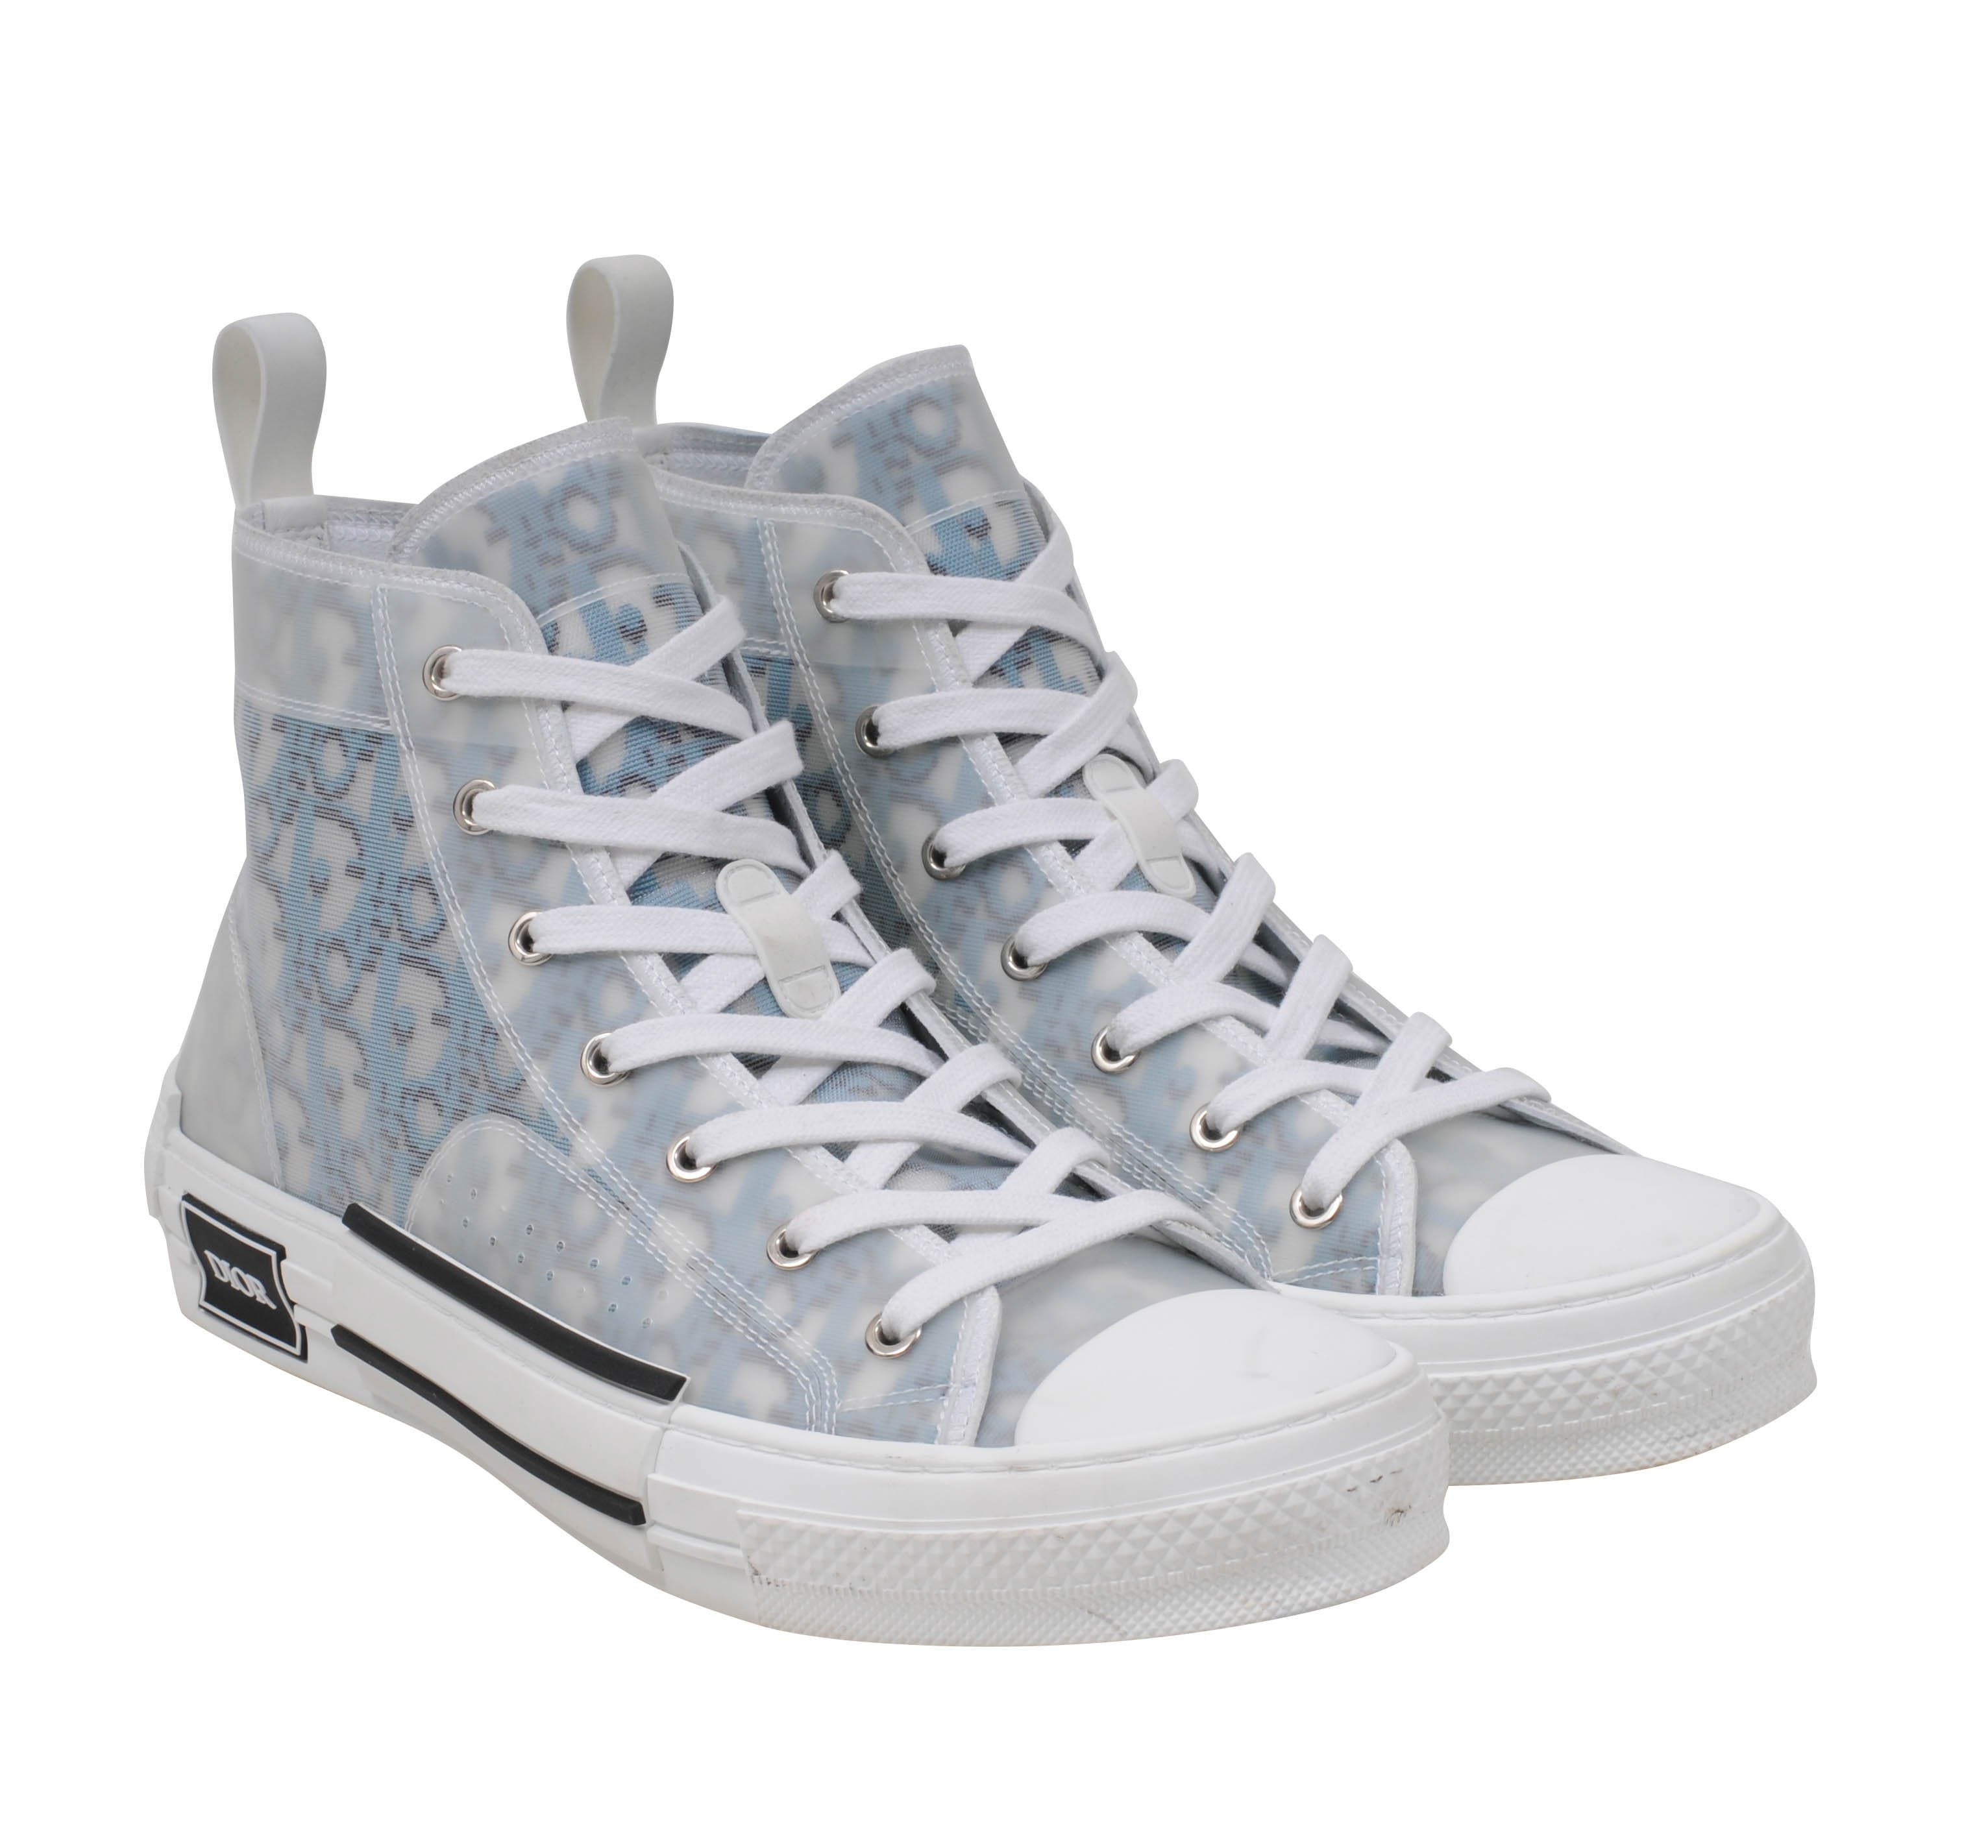 B23 DIOR AND DANIEL ARSHAM HIGHTOP SNEAKER IN LIGHT BLUE DIOR OBLIQUE   Sparkling Shopper Online Clothing  Accessories Store